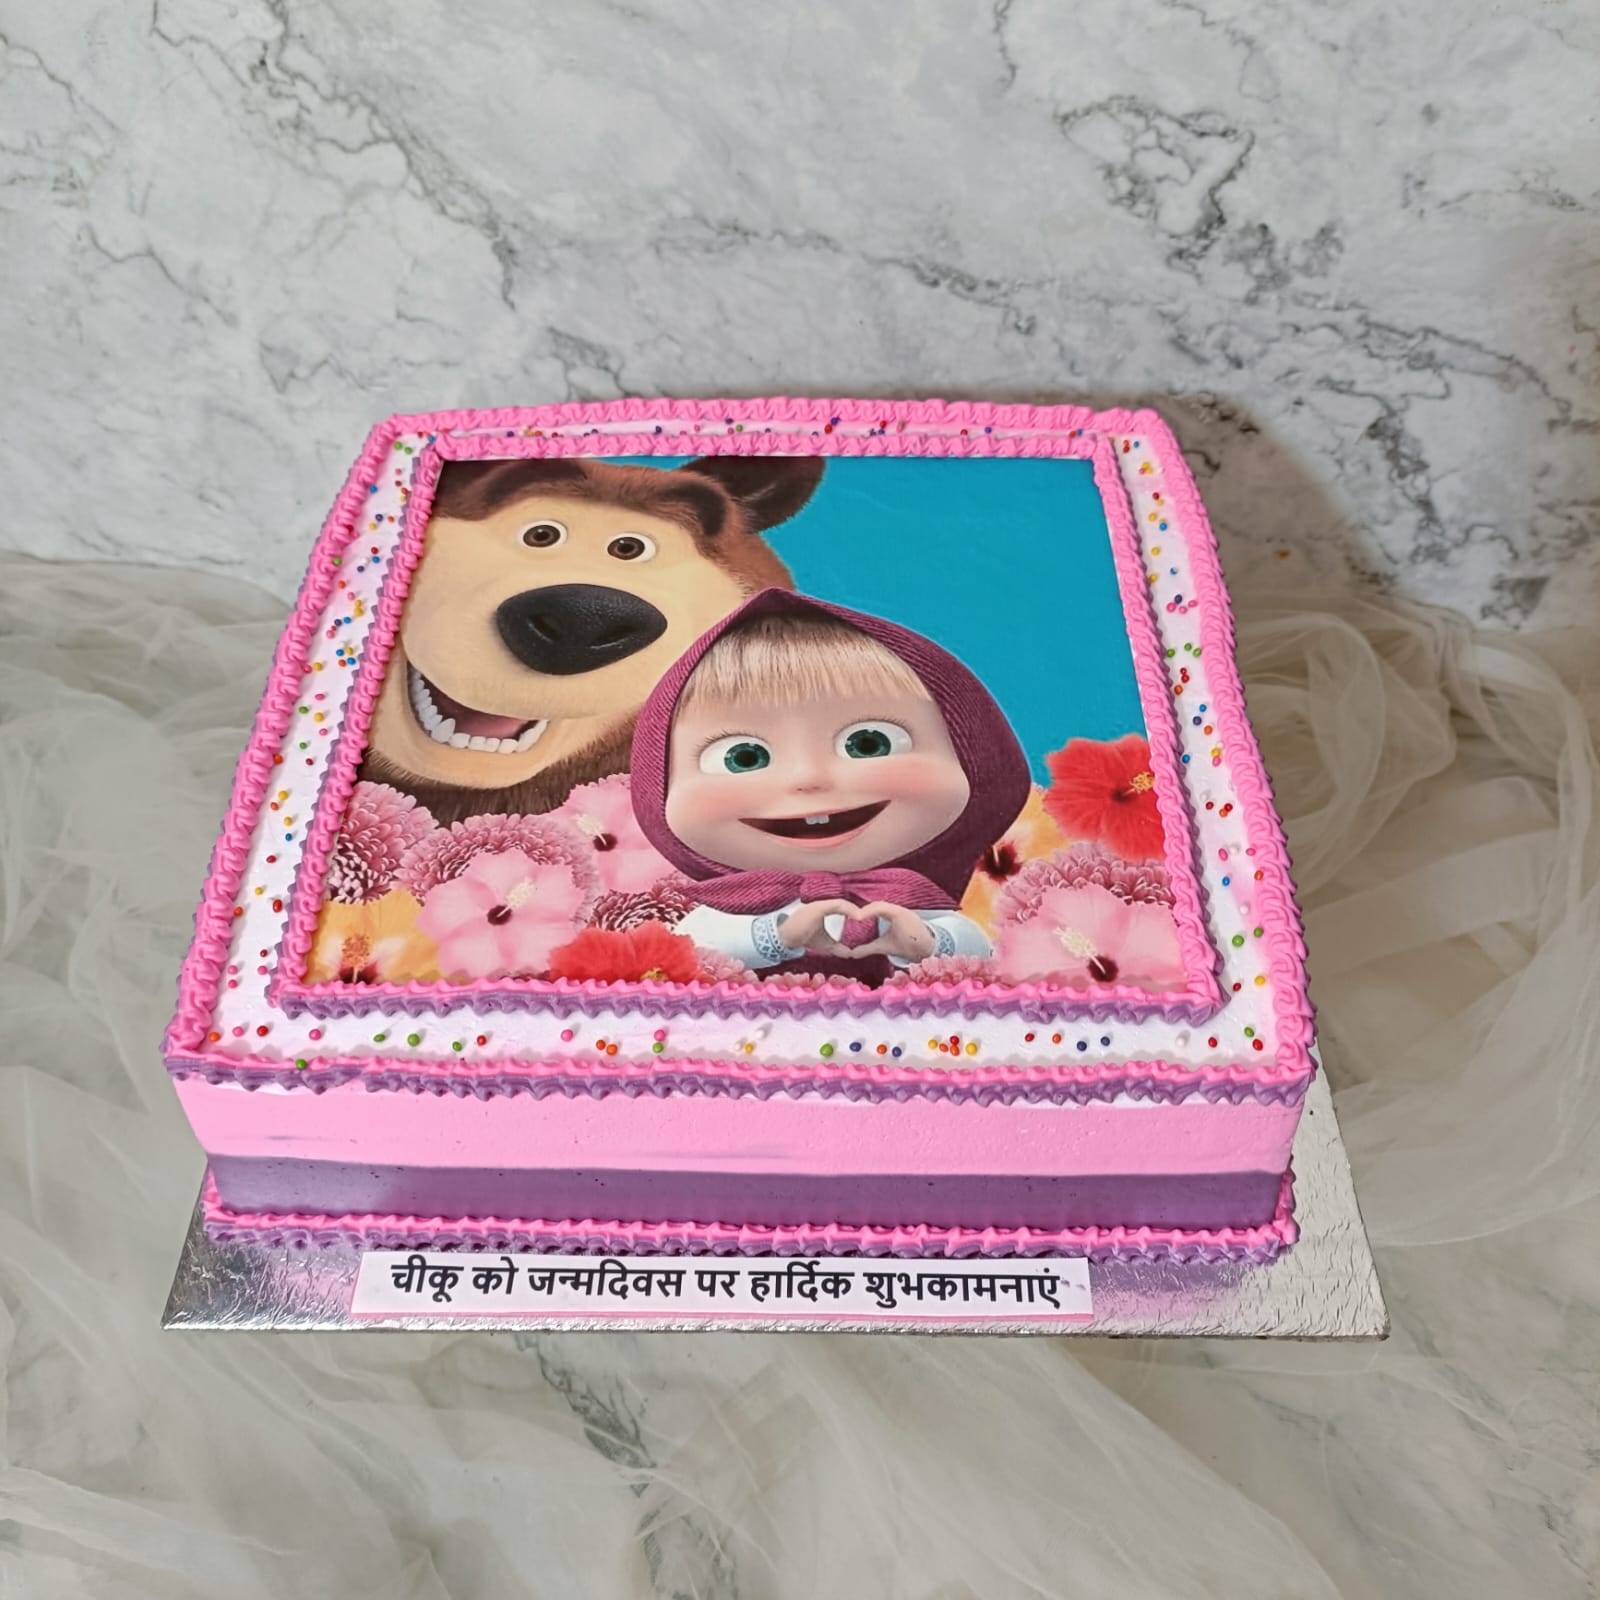 Celebrate Your Child's Birthday with a Masha and Bear Cake Design ...